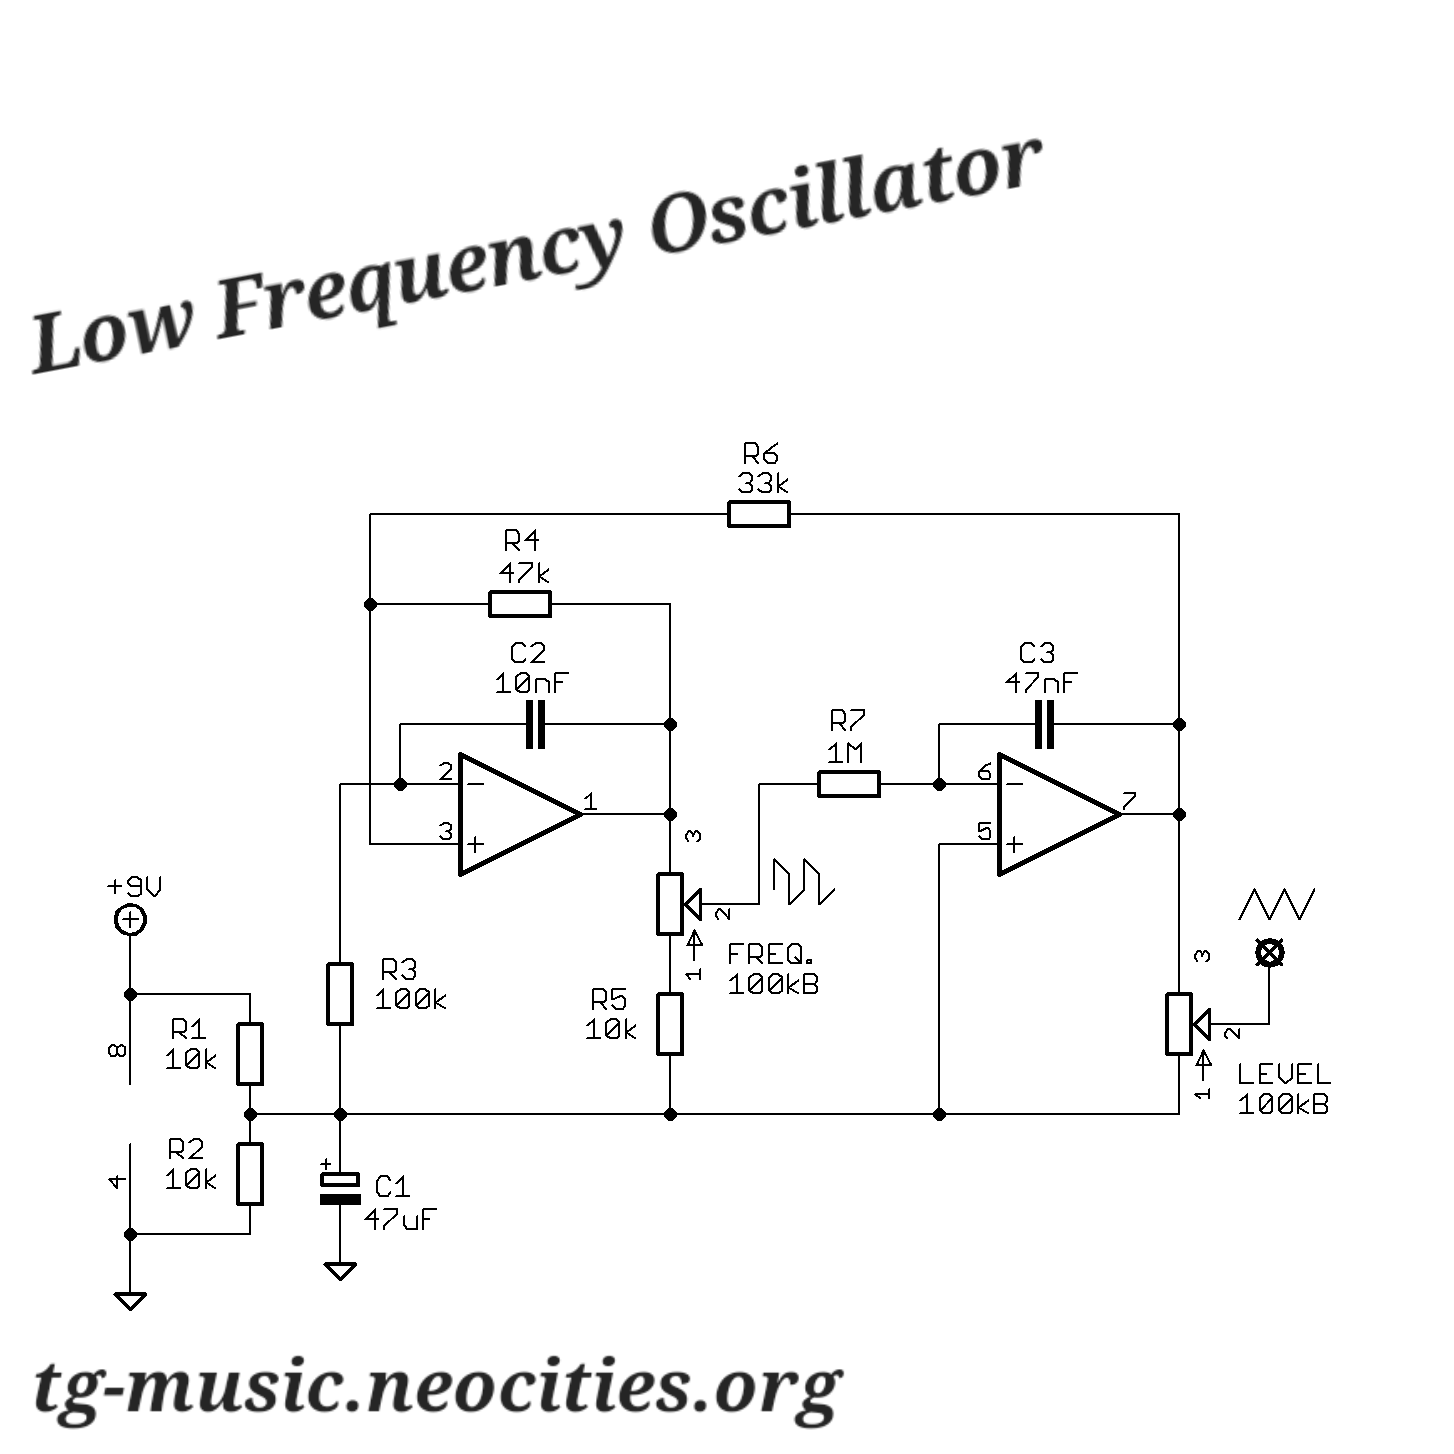 Low frequency oscillator